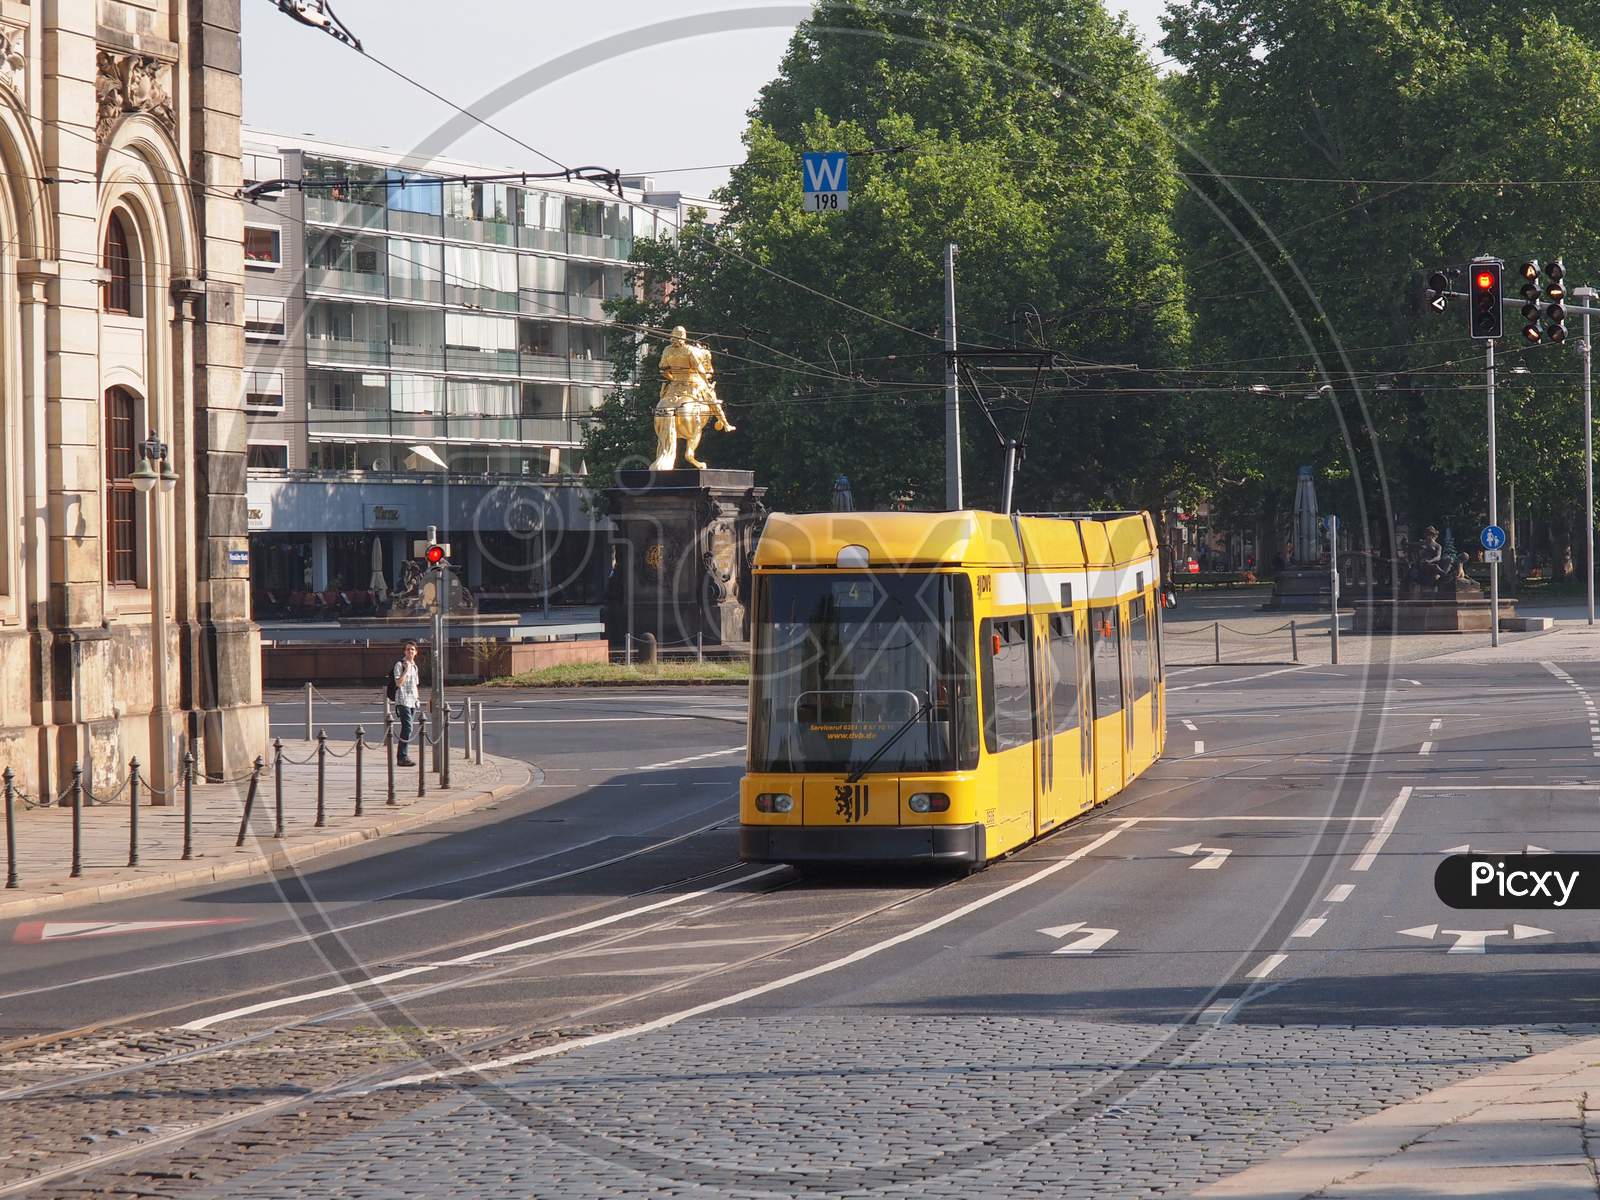 Dresden, Germany - June 11, 2014: Trams Are The Main Public Transport In Dresden